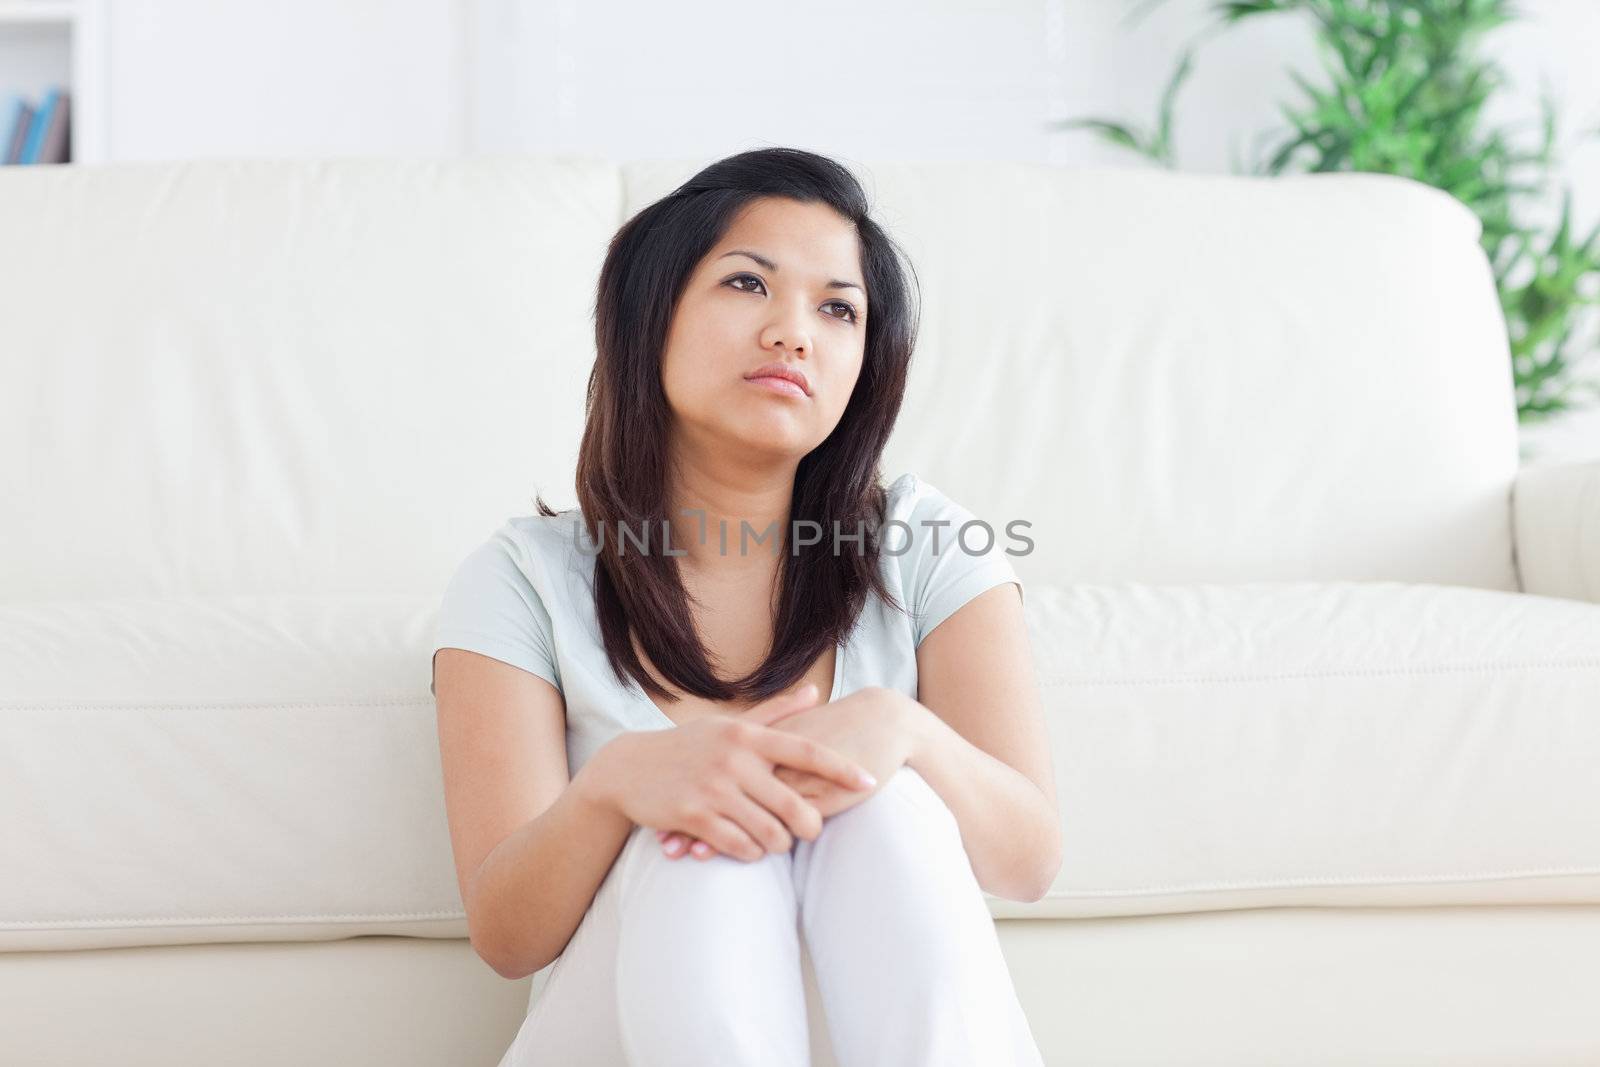 Woman is sitting in front of a couch in a living room